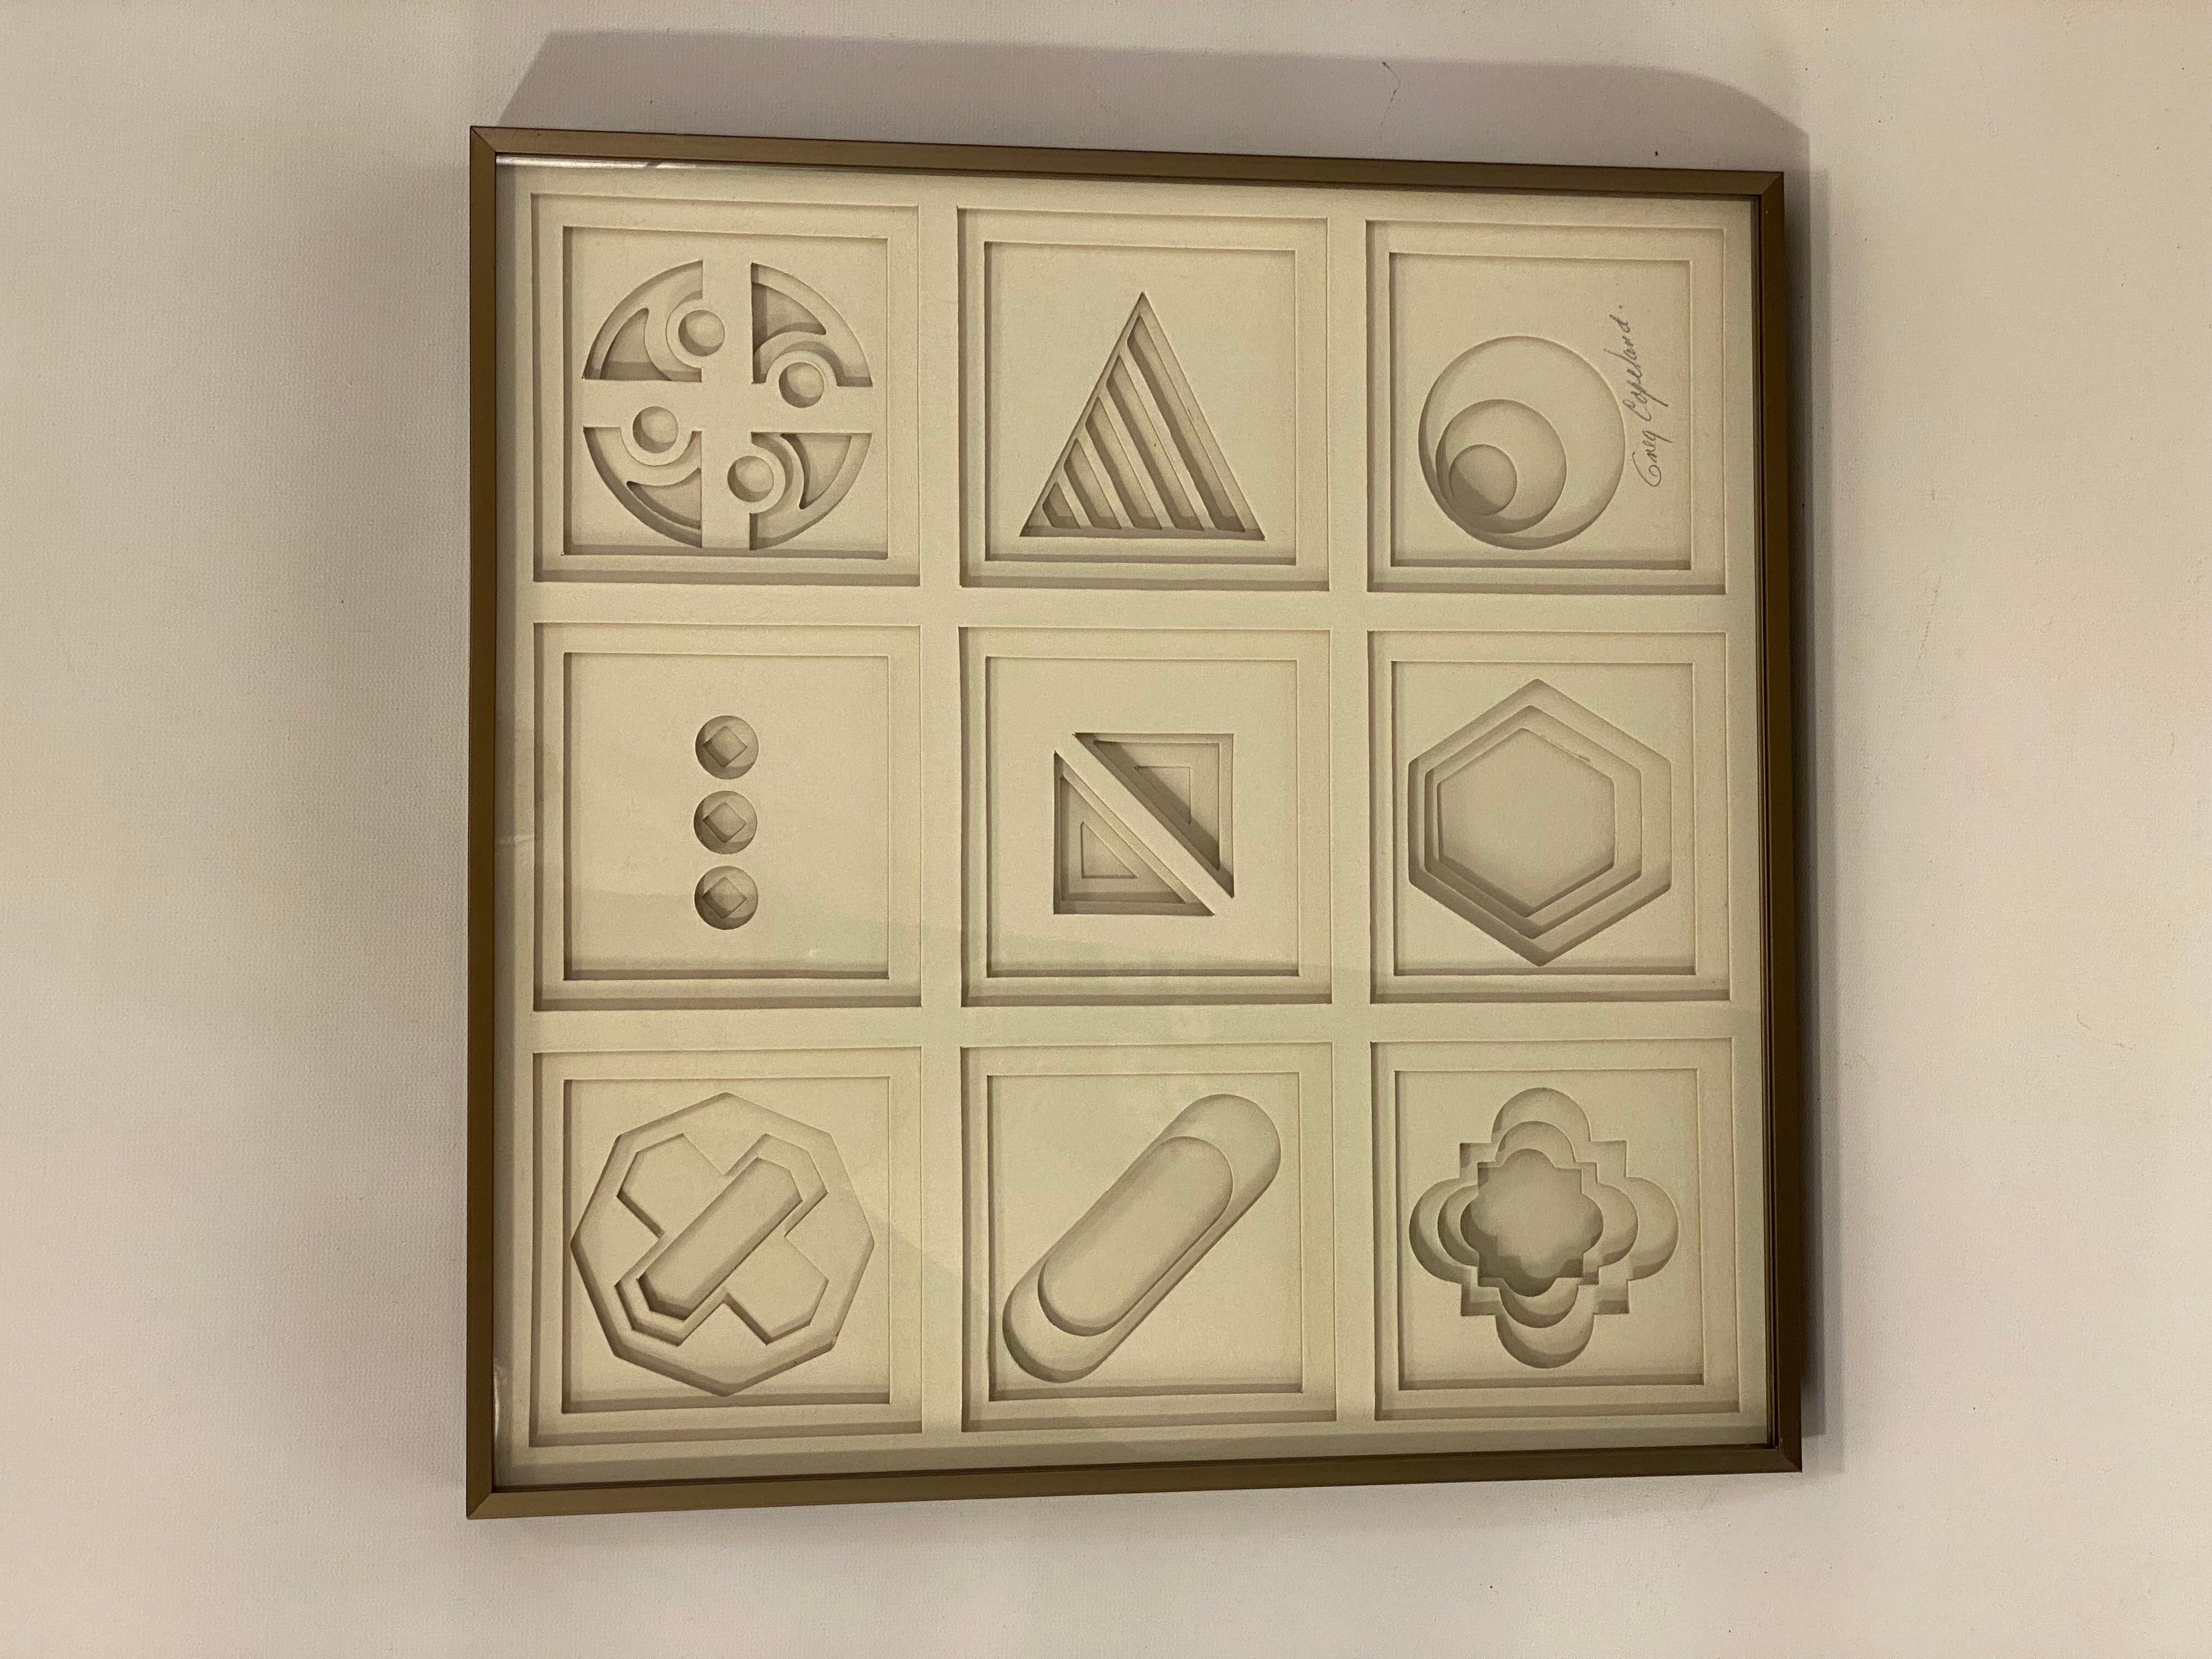 Signed Greg Copeland wall mounted 3D Op Art matte board sculpture. Just an amazing piece of geometric art produced by cutting and layering multiple pieces of white matte board. Signed in pencil lower right, Greg Copeland and signed and dated on the